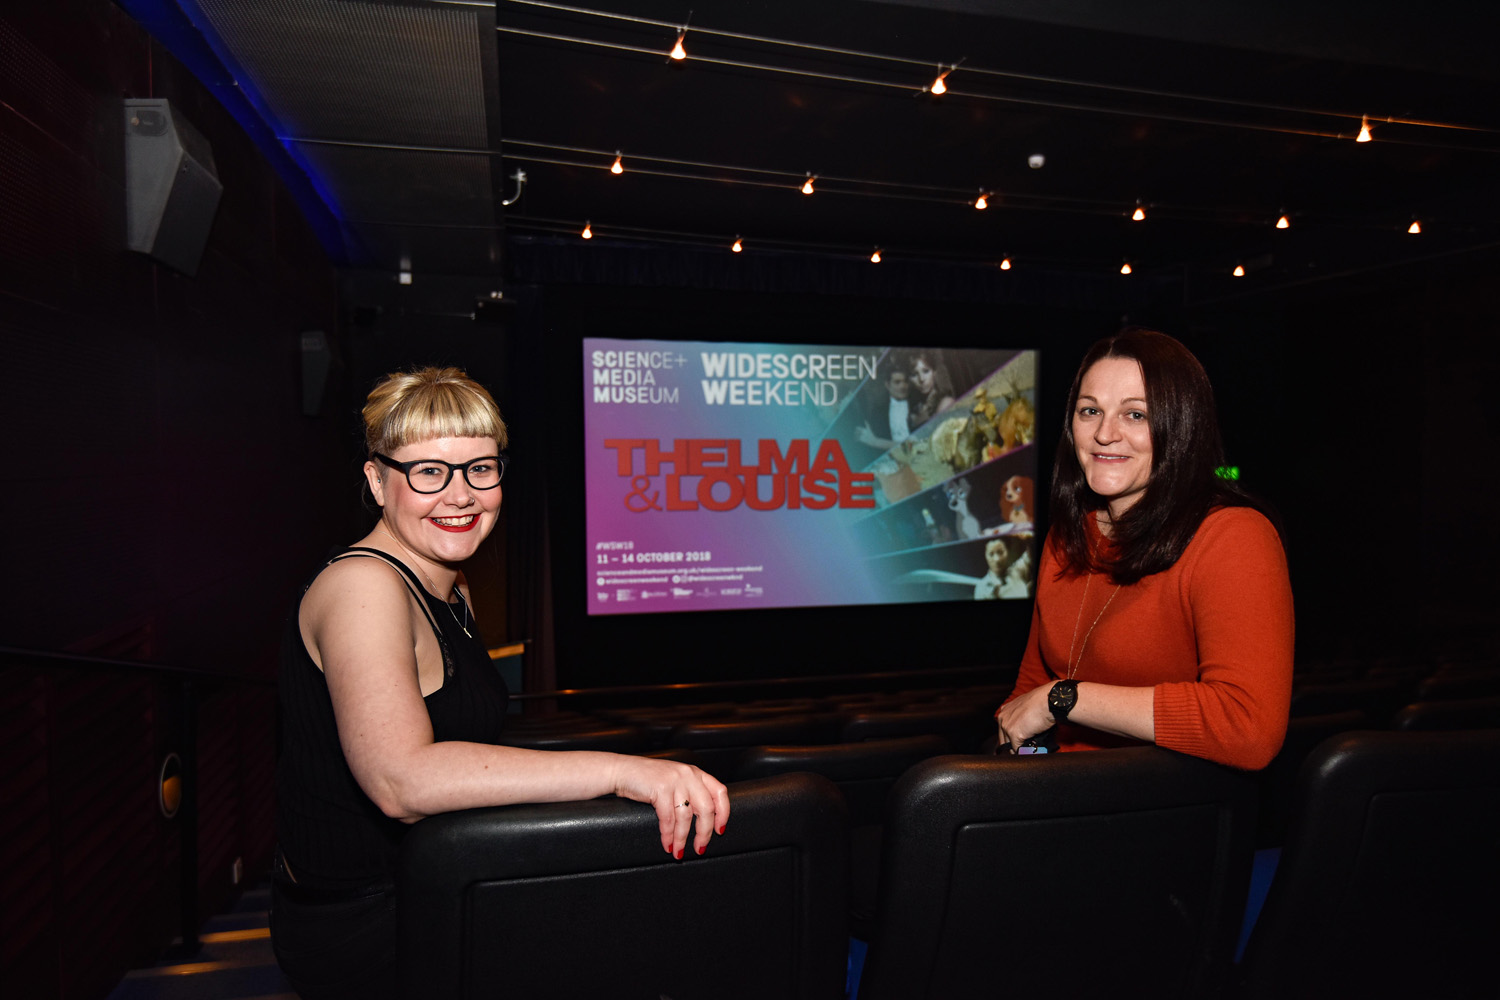 Melanie Iredale and Annabel Grundy in Cubby Broccoli Cinema before their introduction to Thelma & Louise